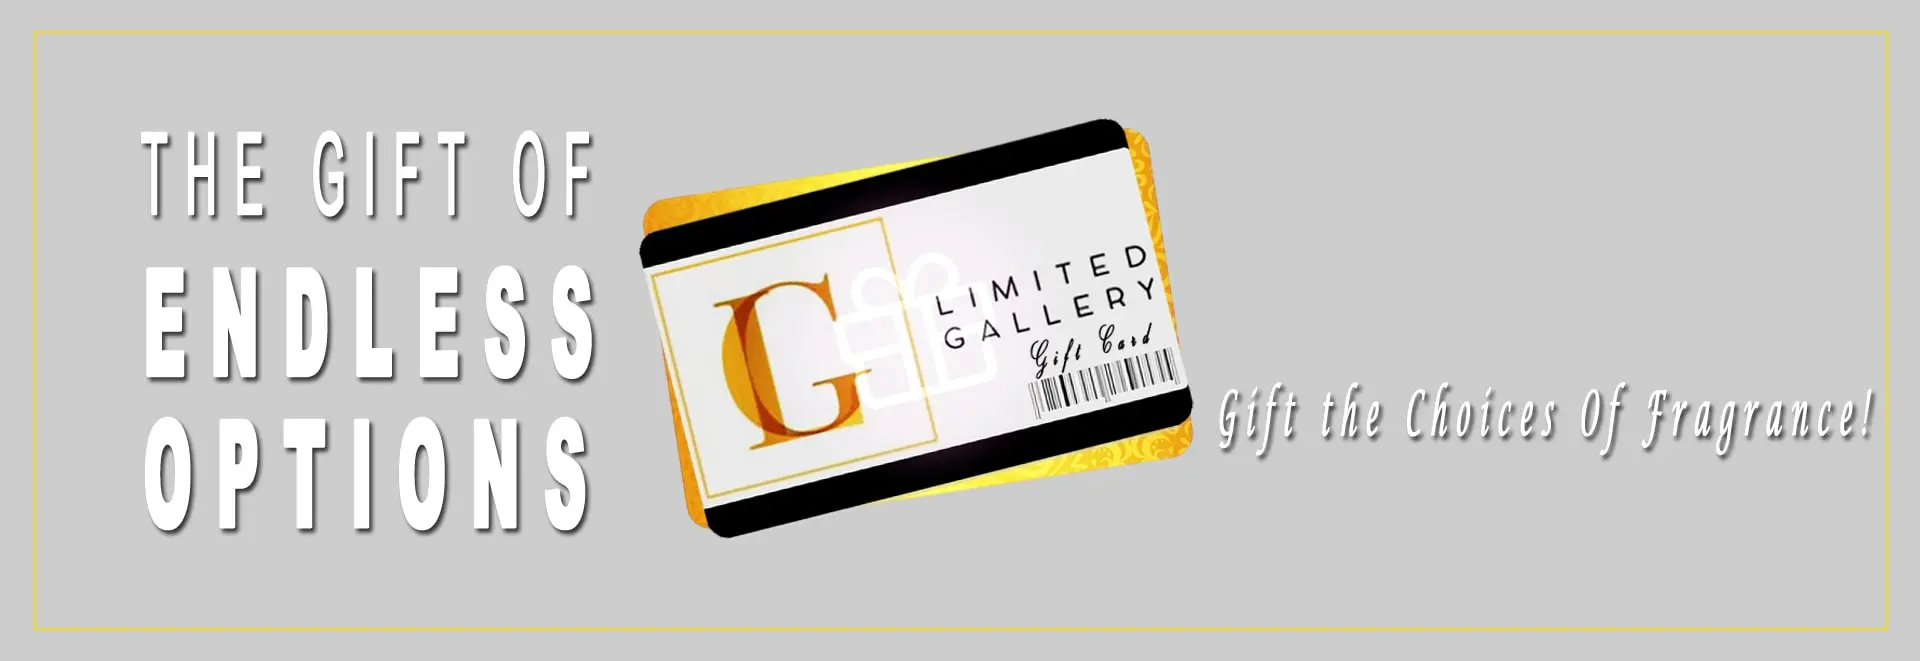 Limitedgallery Gift Card